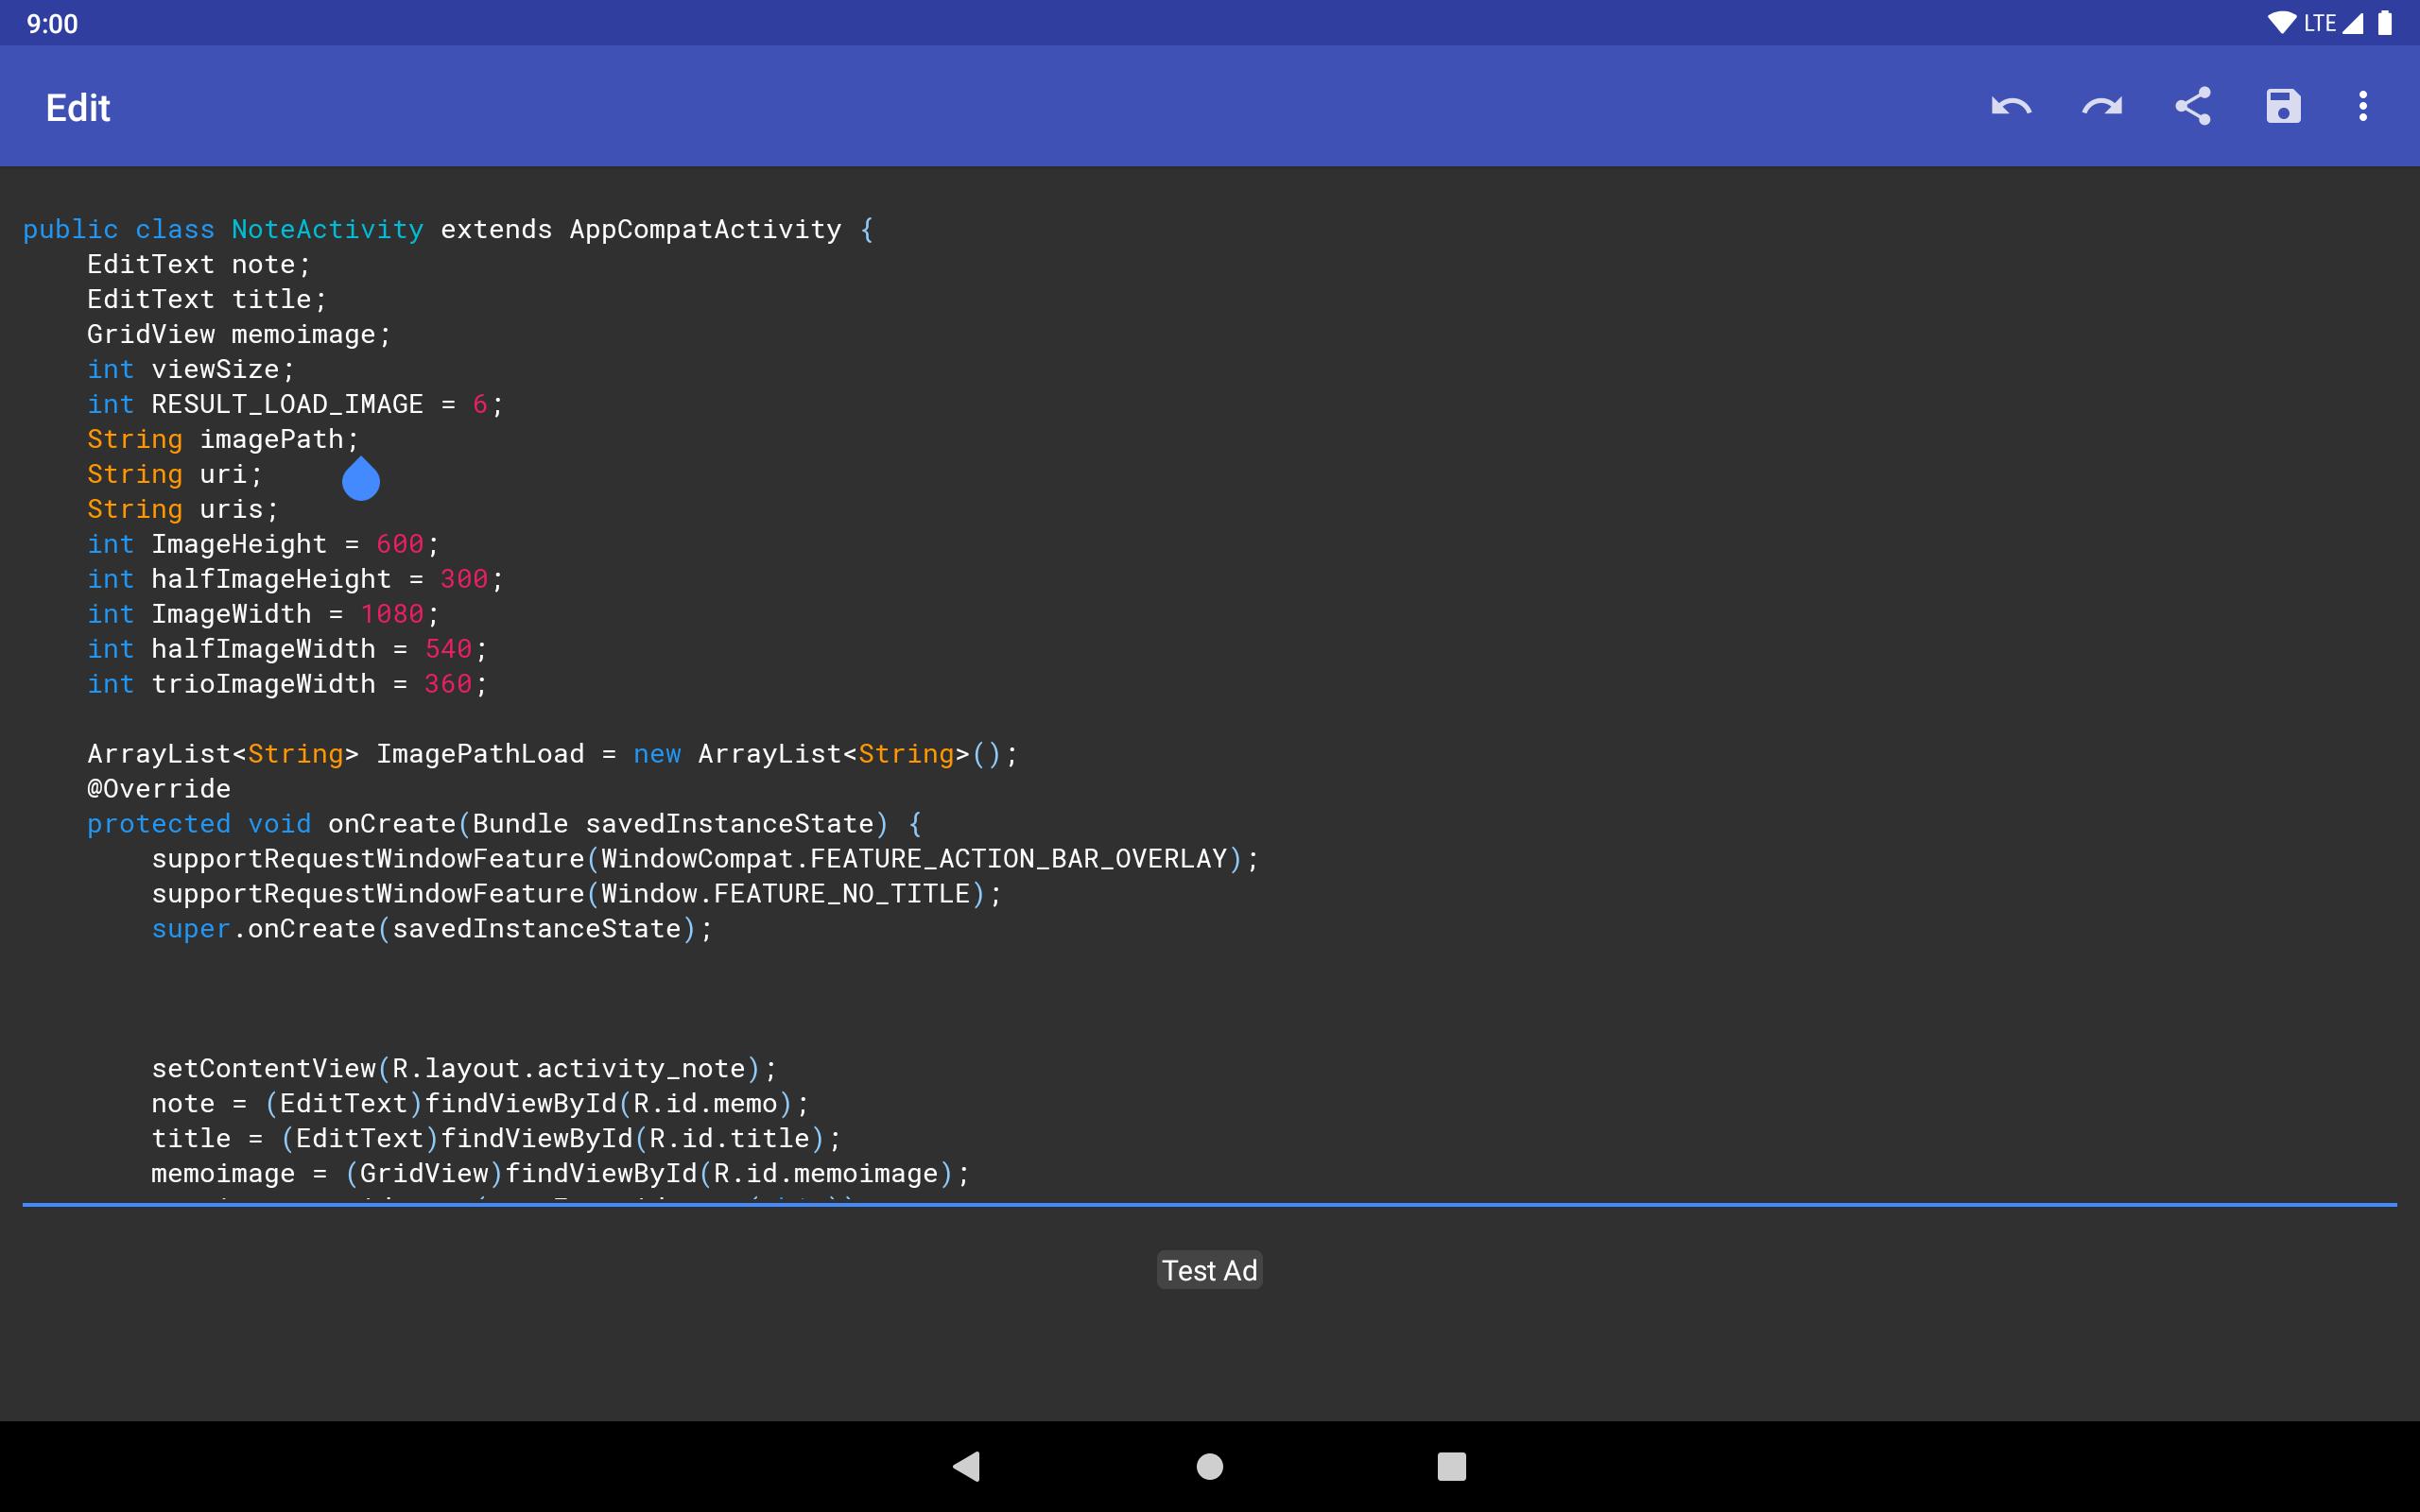 Text Editor for Android - APK Download